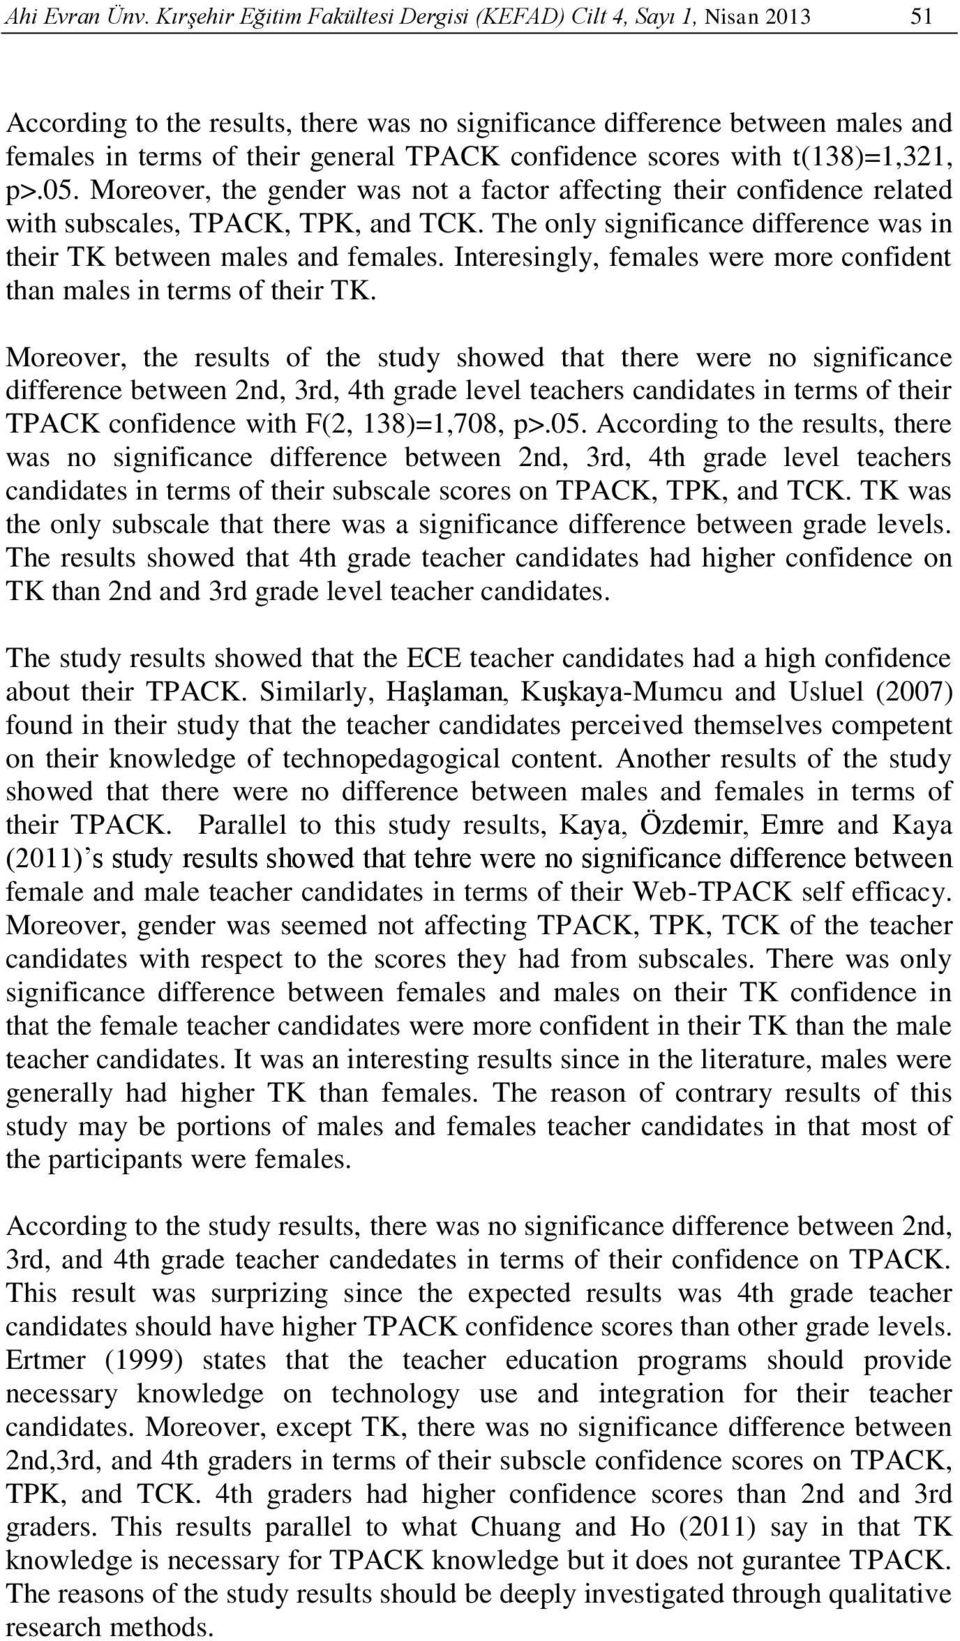 confidence scores with t(138)=1,321, p>.05. Moreover, the gender was not a factor affecting their confidence related with subscales, TPACK, TPK, and TCK.